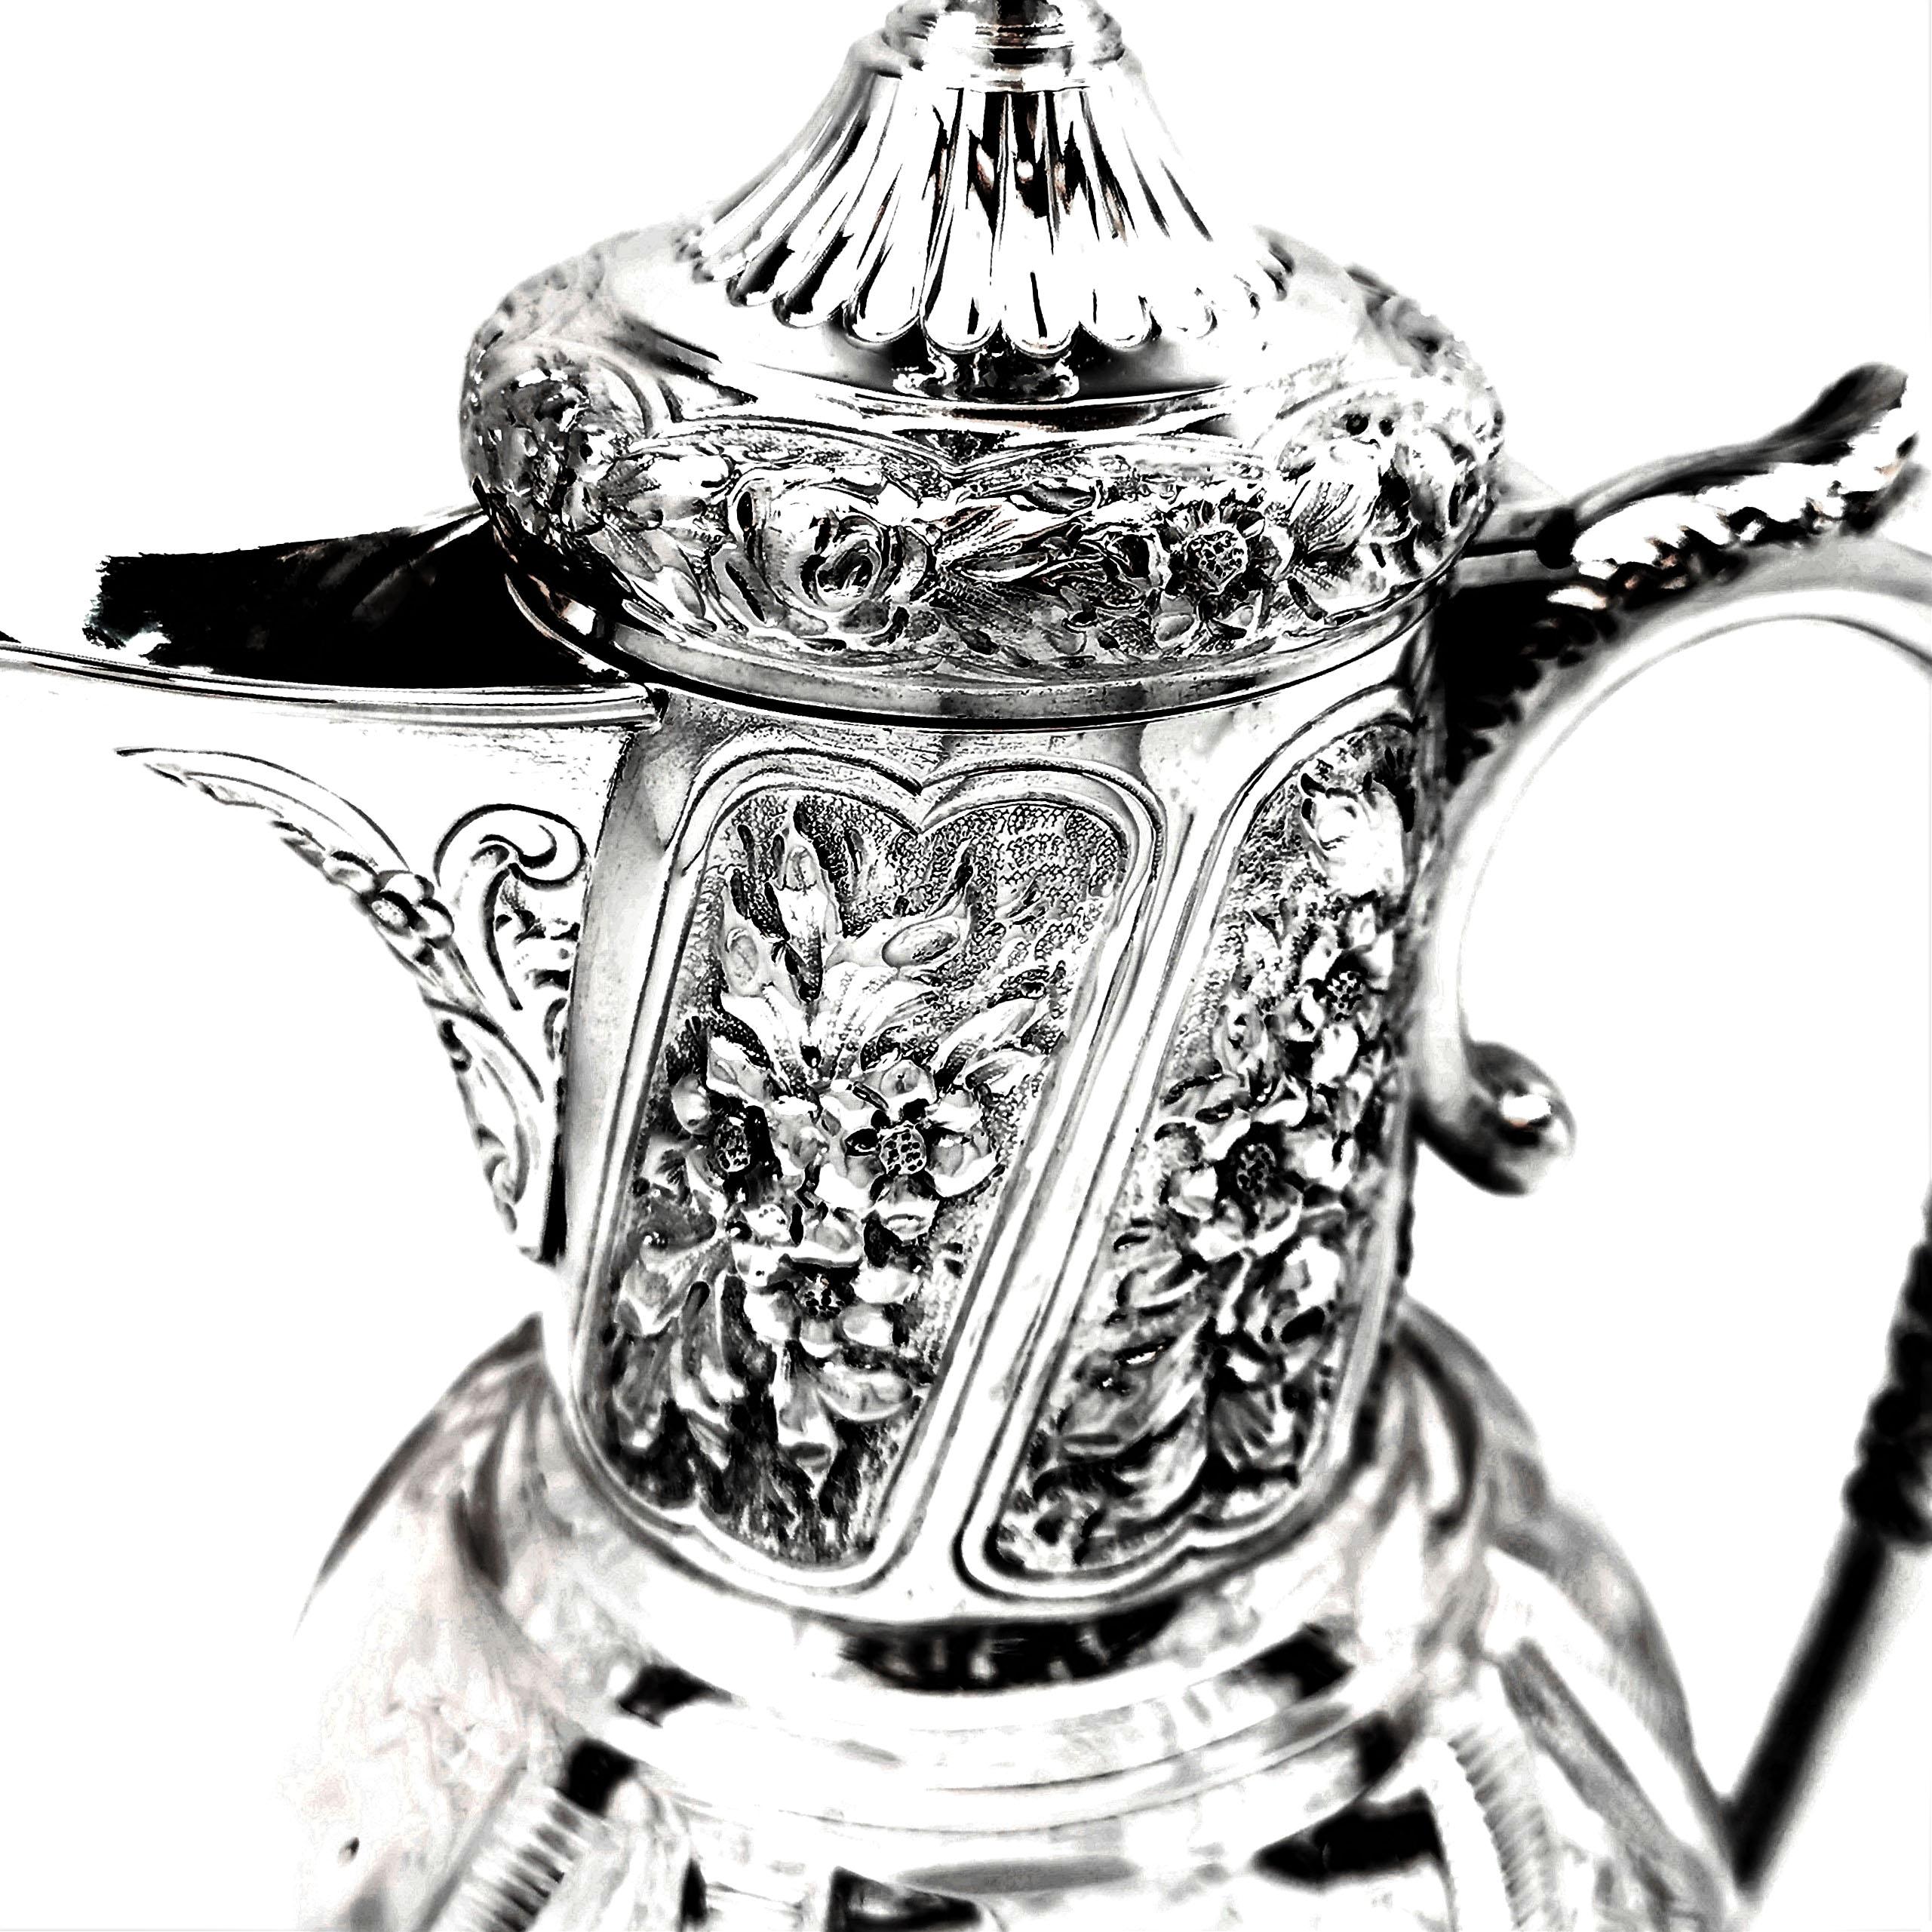 20th Century Antique Victorian Silver and Cut Glass Claret Jug / Wine Decanter Ewer, 1900